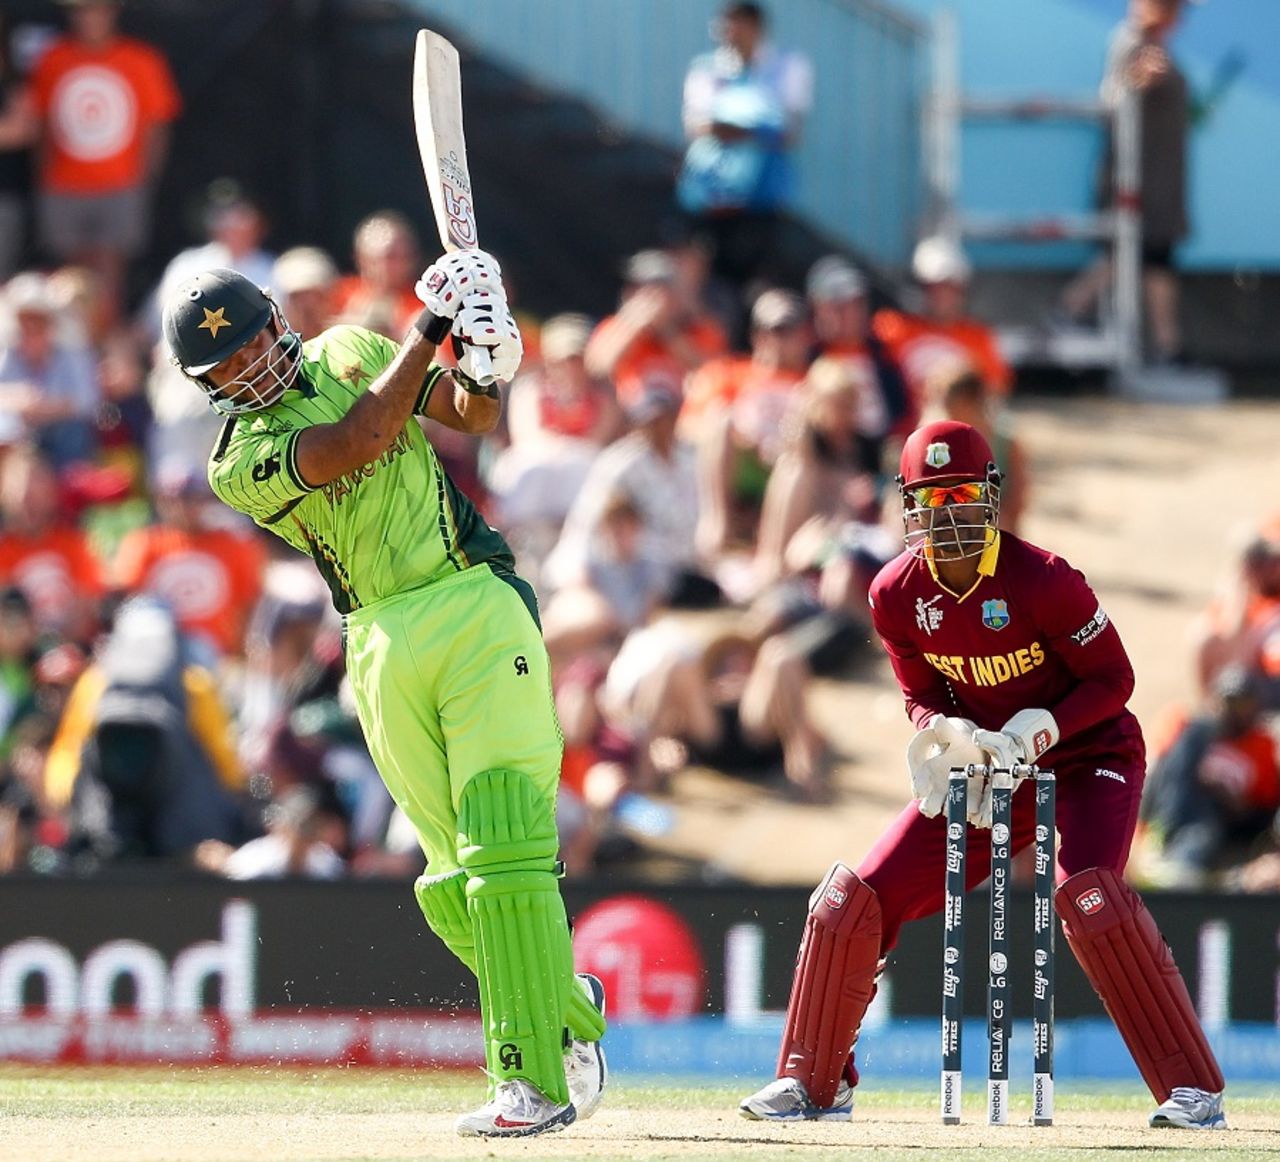 Sohaib Maqsood hits out, Pakistan v West Indies, World Cup 2015, Group B, Christchurch, February 21, 2015